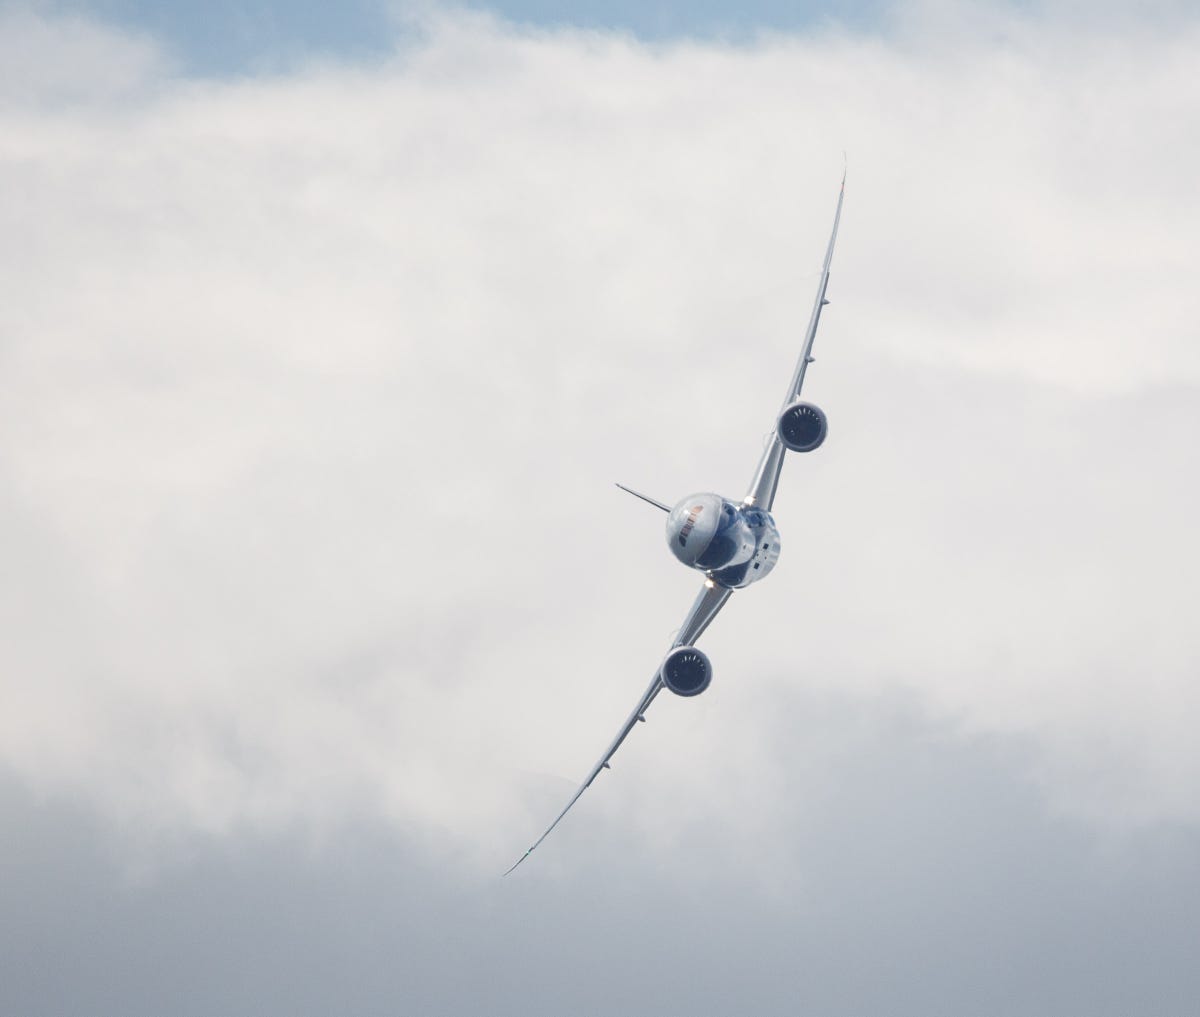 A head-on view of the Boeing 787-9 banking steeply.